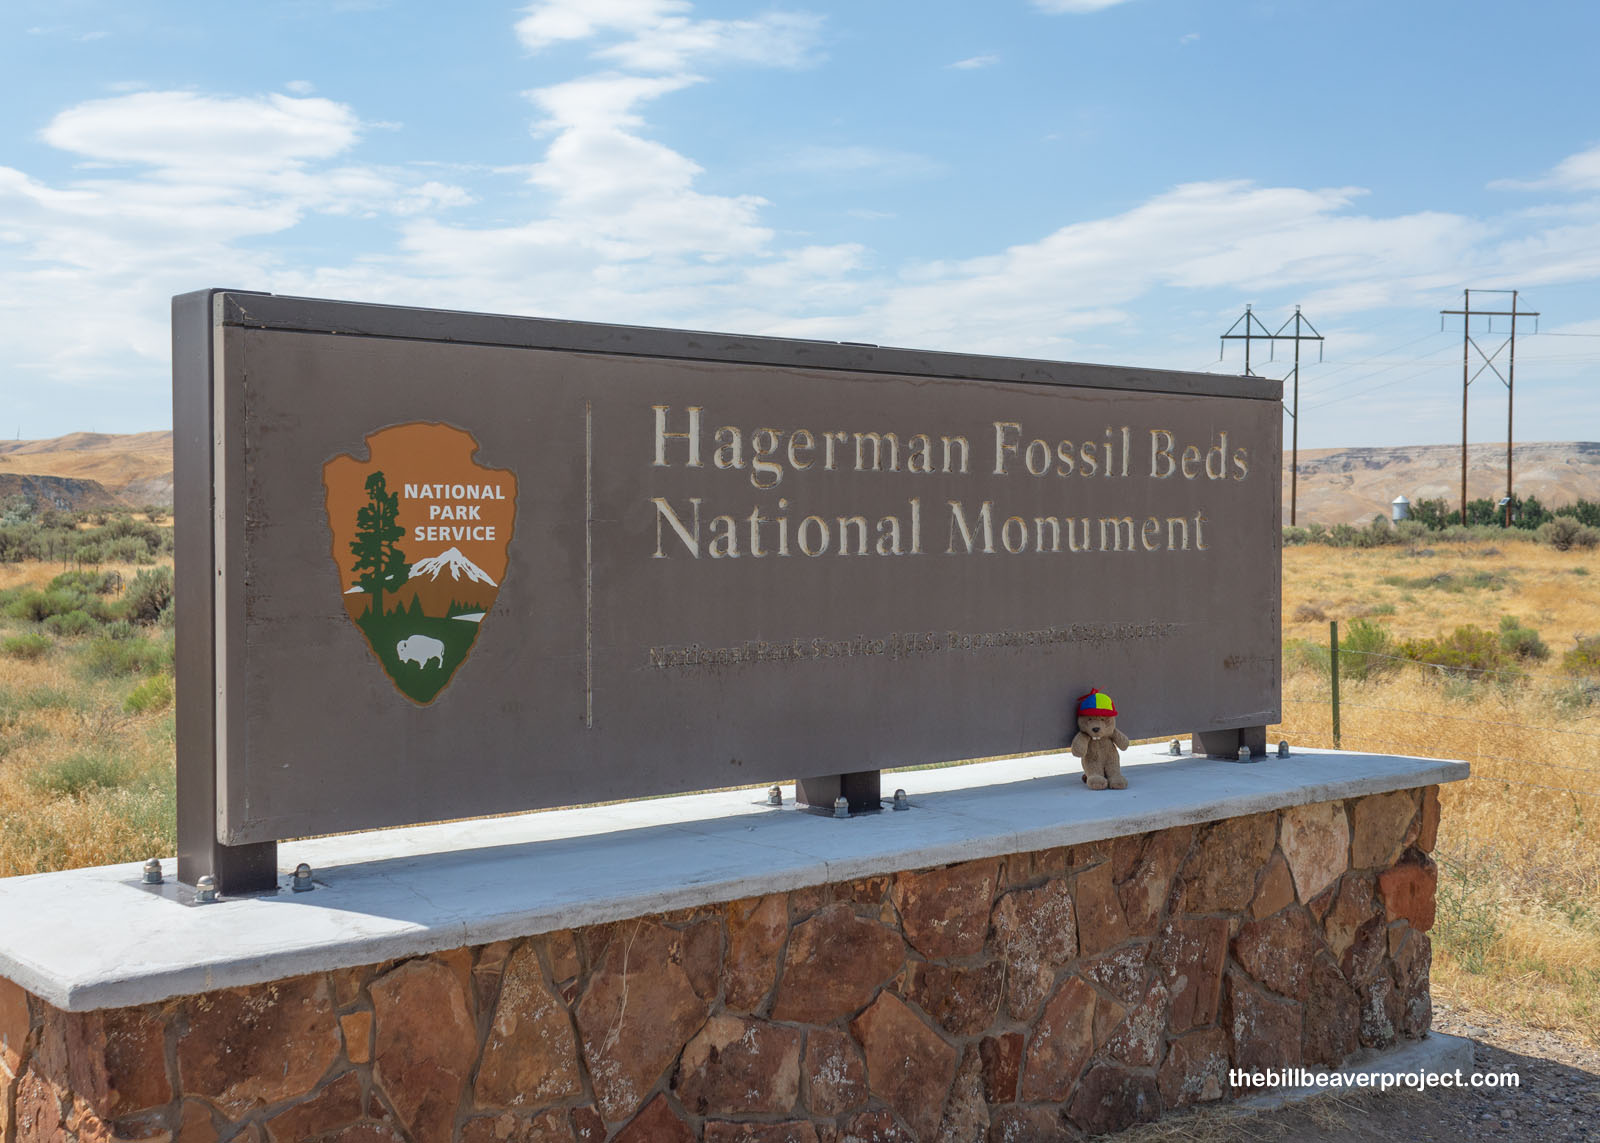 Hagerman Fossil Beds National Monument!